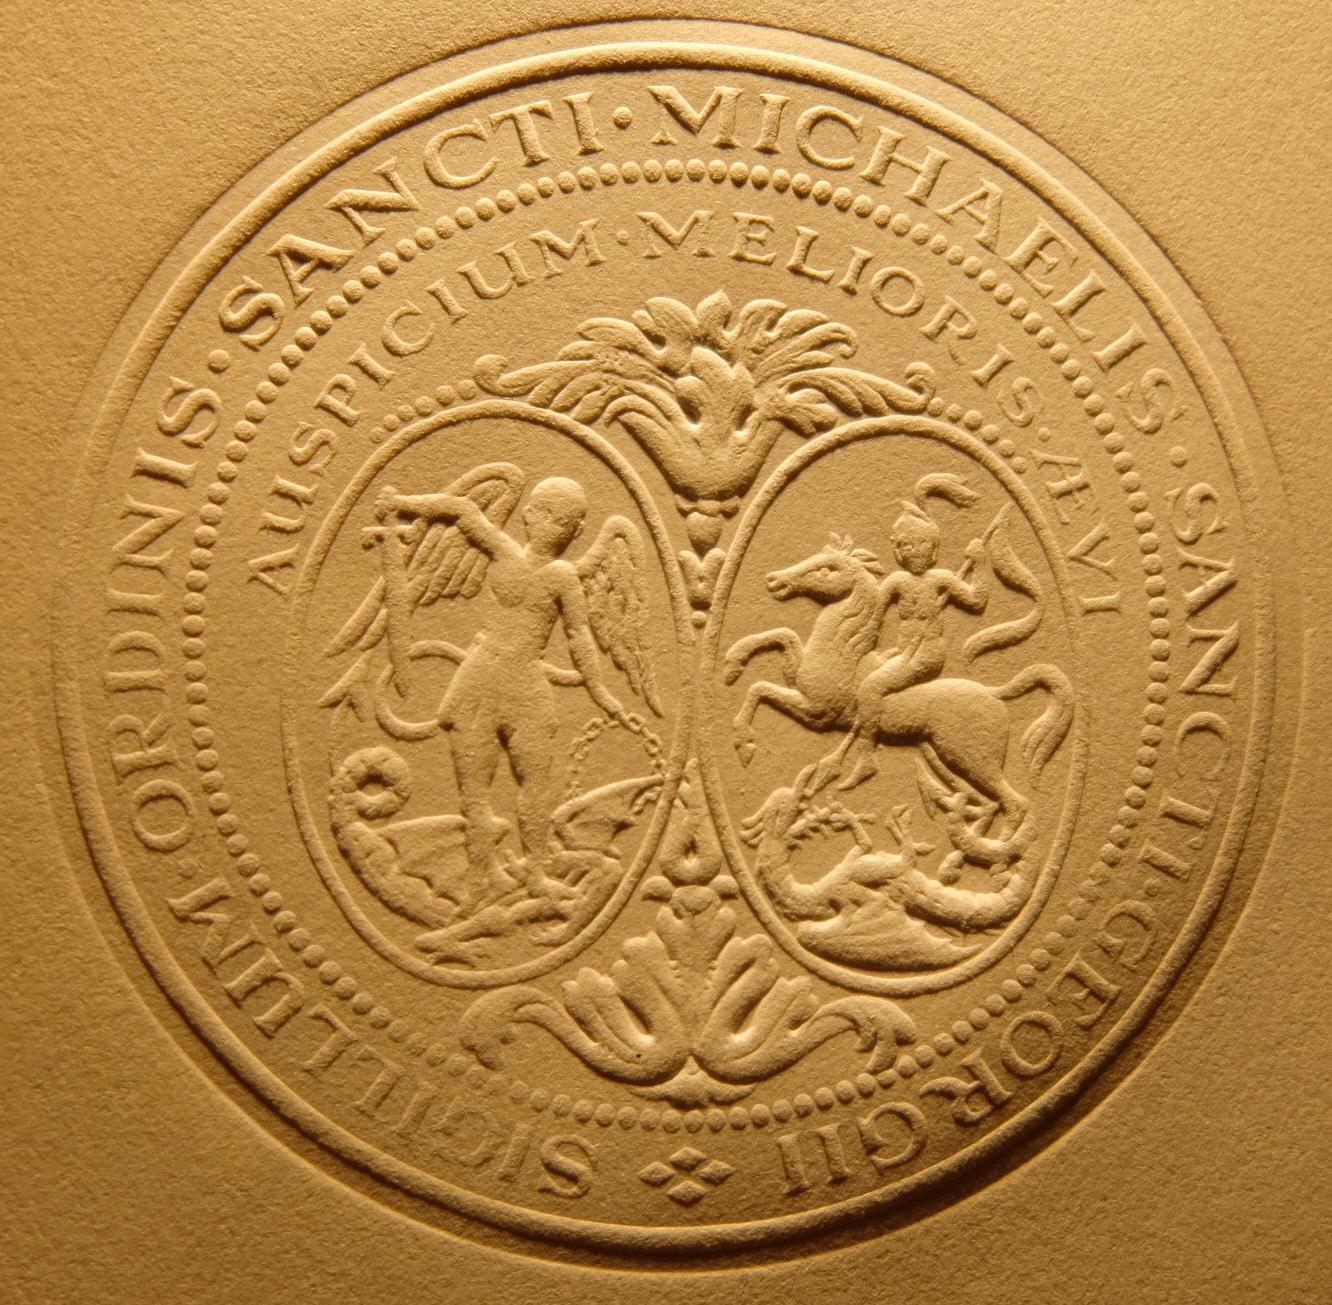 Seal of the order